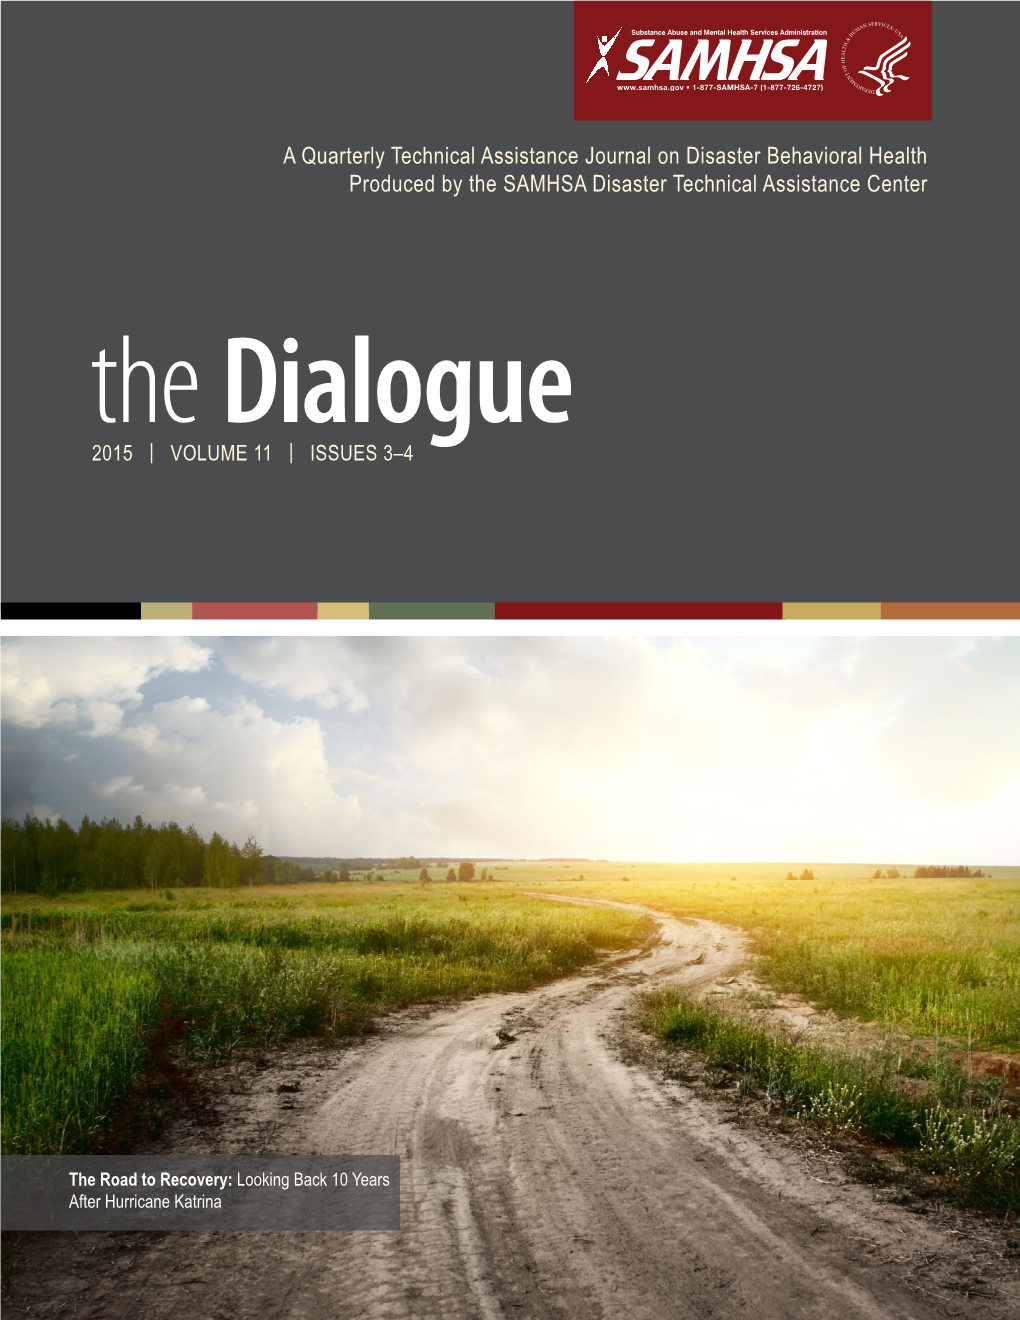 The Dialogue, Volume 11, Issues